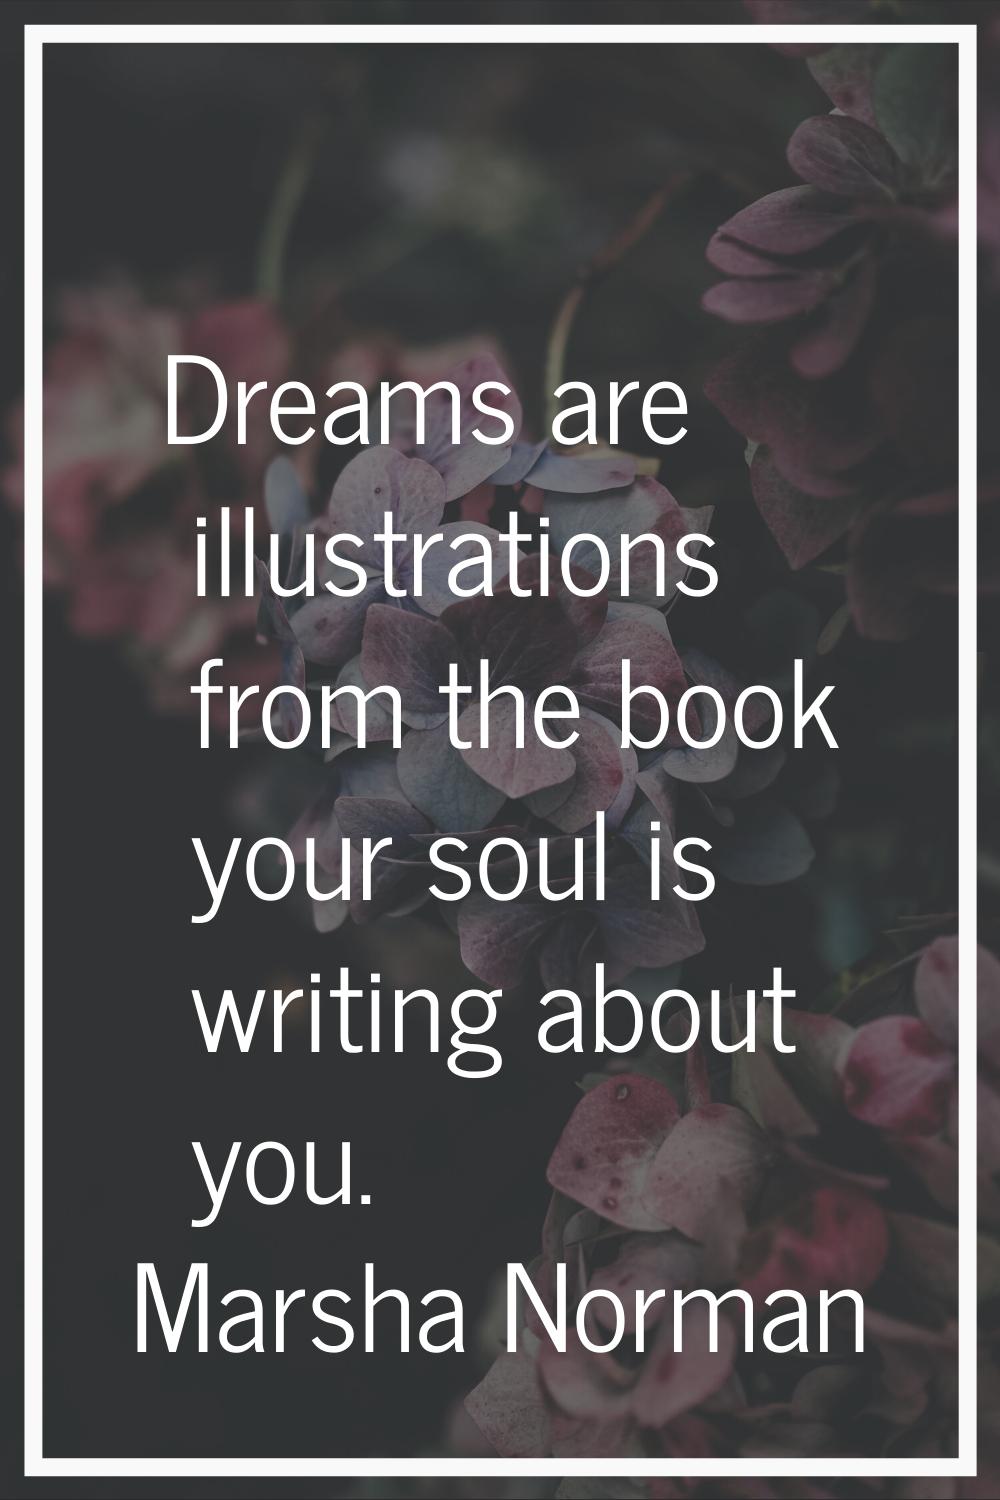 Dreams are illustrations from the book your soul is writing about you.